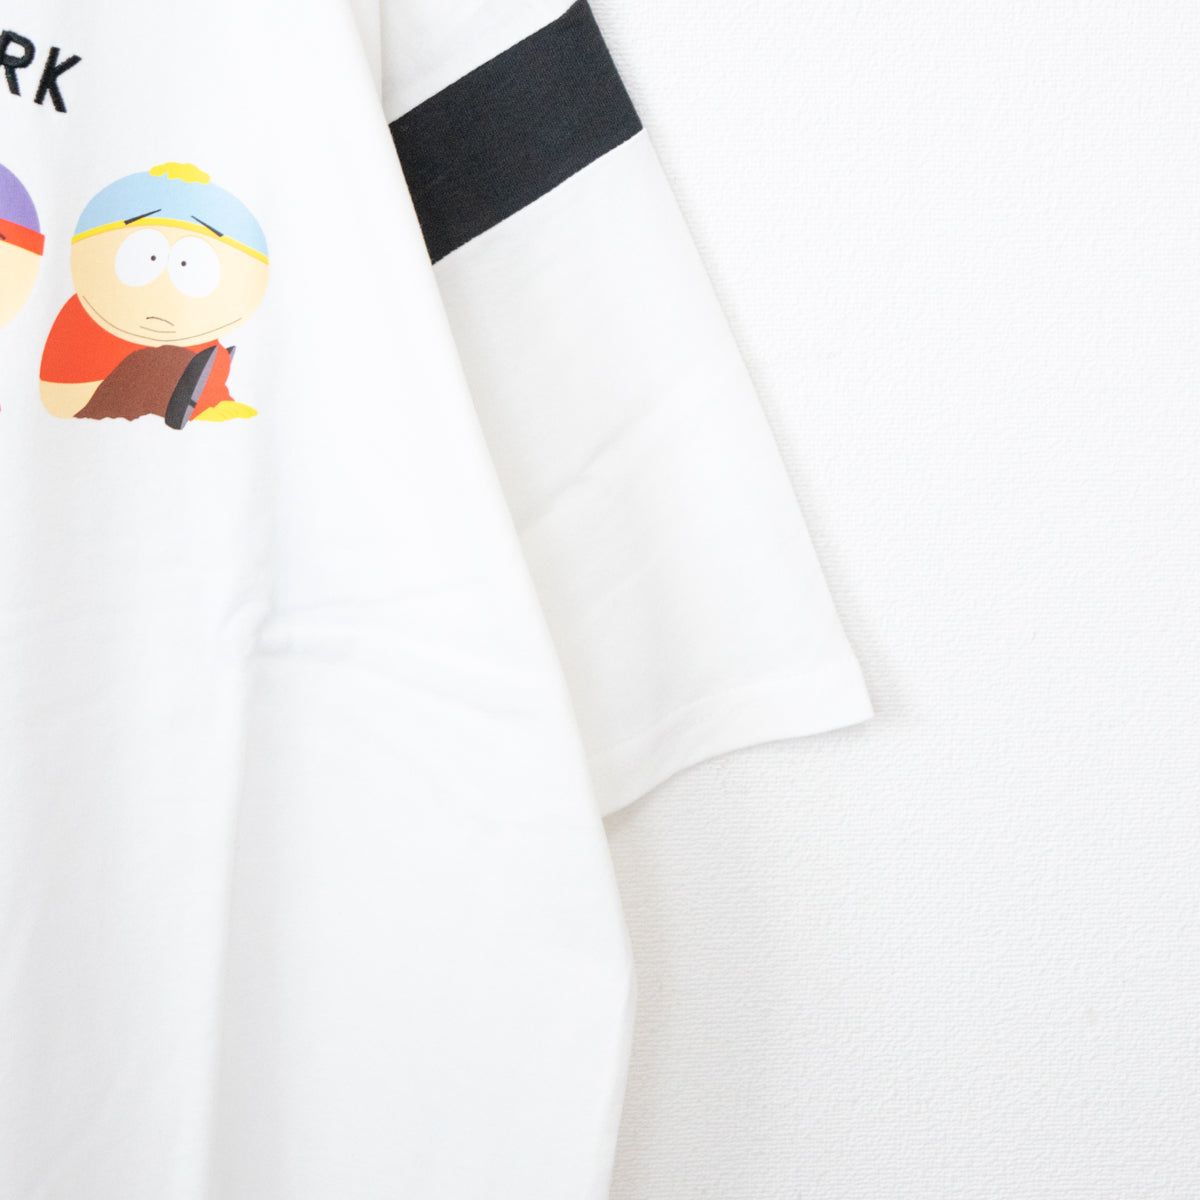 SOUTH PARK プリントロゴ刺繍 Tシャツ WHITE